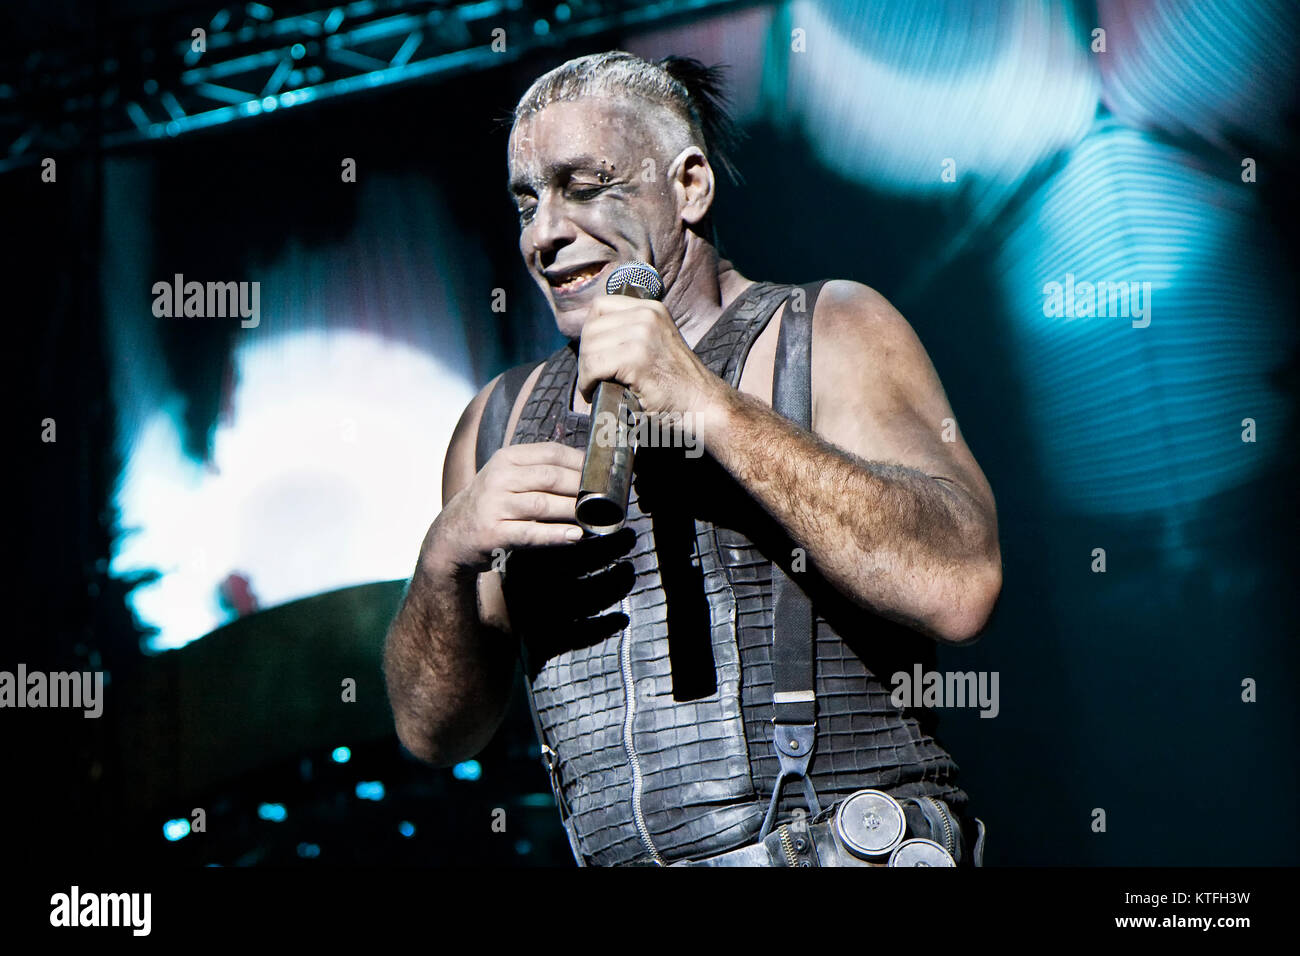 Rammstein, the German industrial metal band, performs a live concert at  Vallhall Arena in Oslo. Here the band's characteristic vocalist Till  Lindemann is seen live on stage. Norway, 19/02 2012 Stock Photo - Alamy